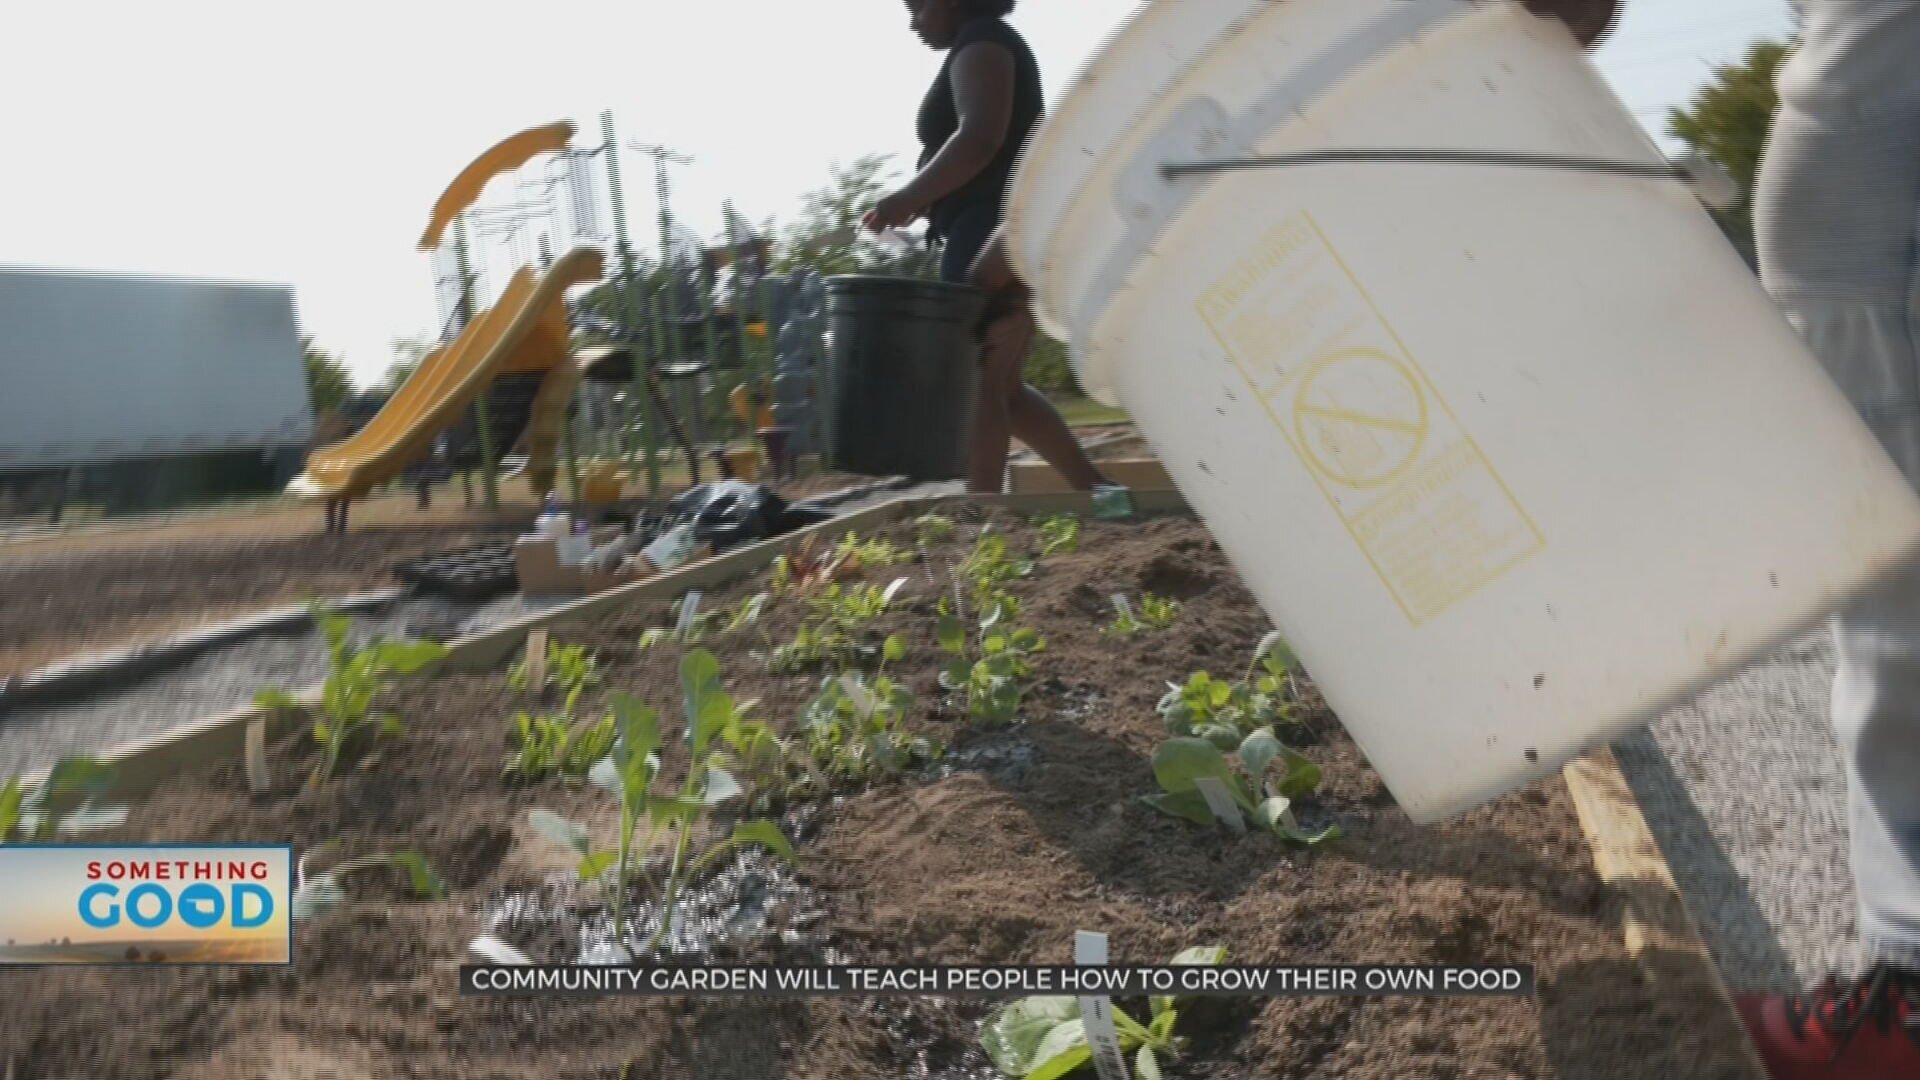 New Tulsa Community Garden Intended As Safe Place To Grow 